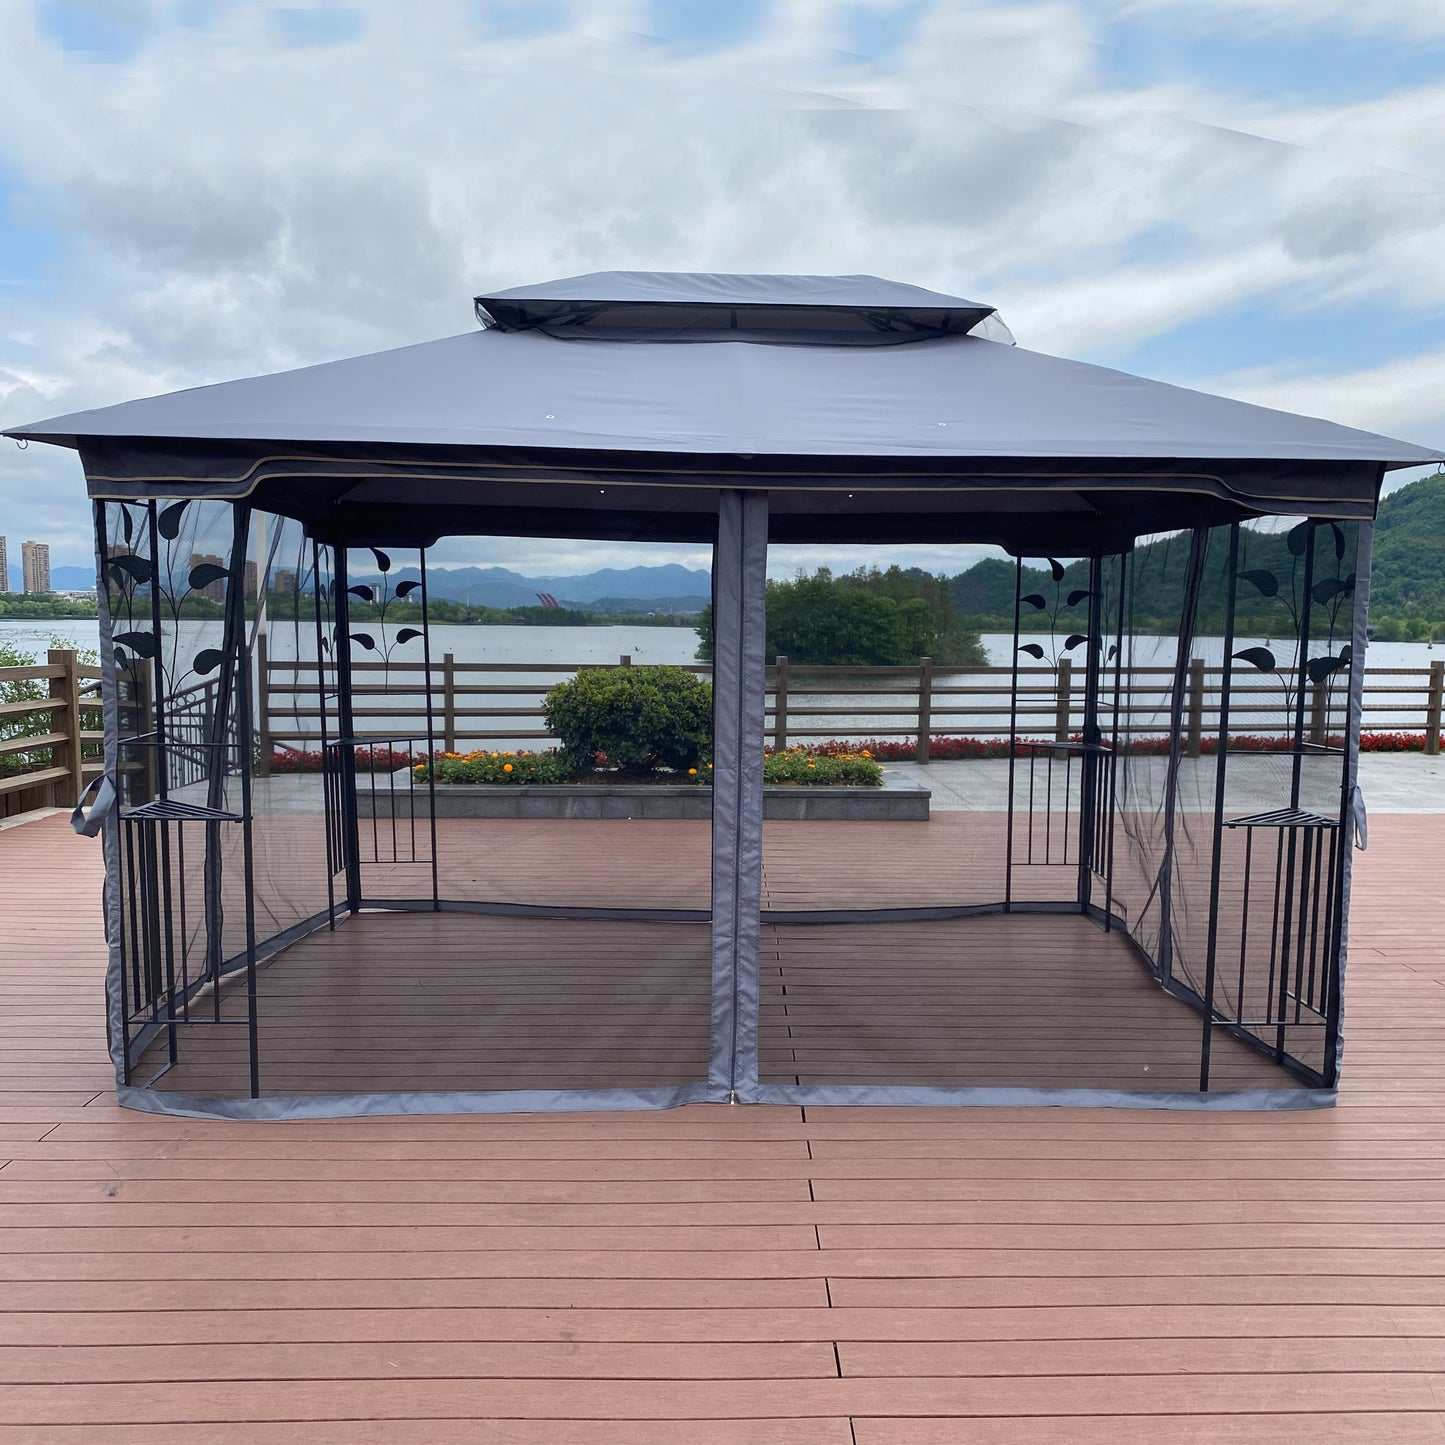 13x10 Outdoor Patio Gazebo Canopy Tent With Ventilated Double Roof And Mosquito net(Detachable Mesh Screen On All Sides),Suitable for Lawn, Garden, Backyard and Deck,Gray Top